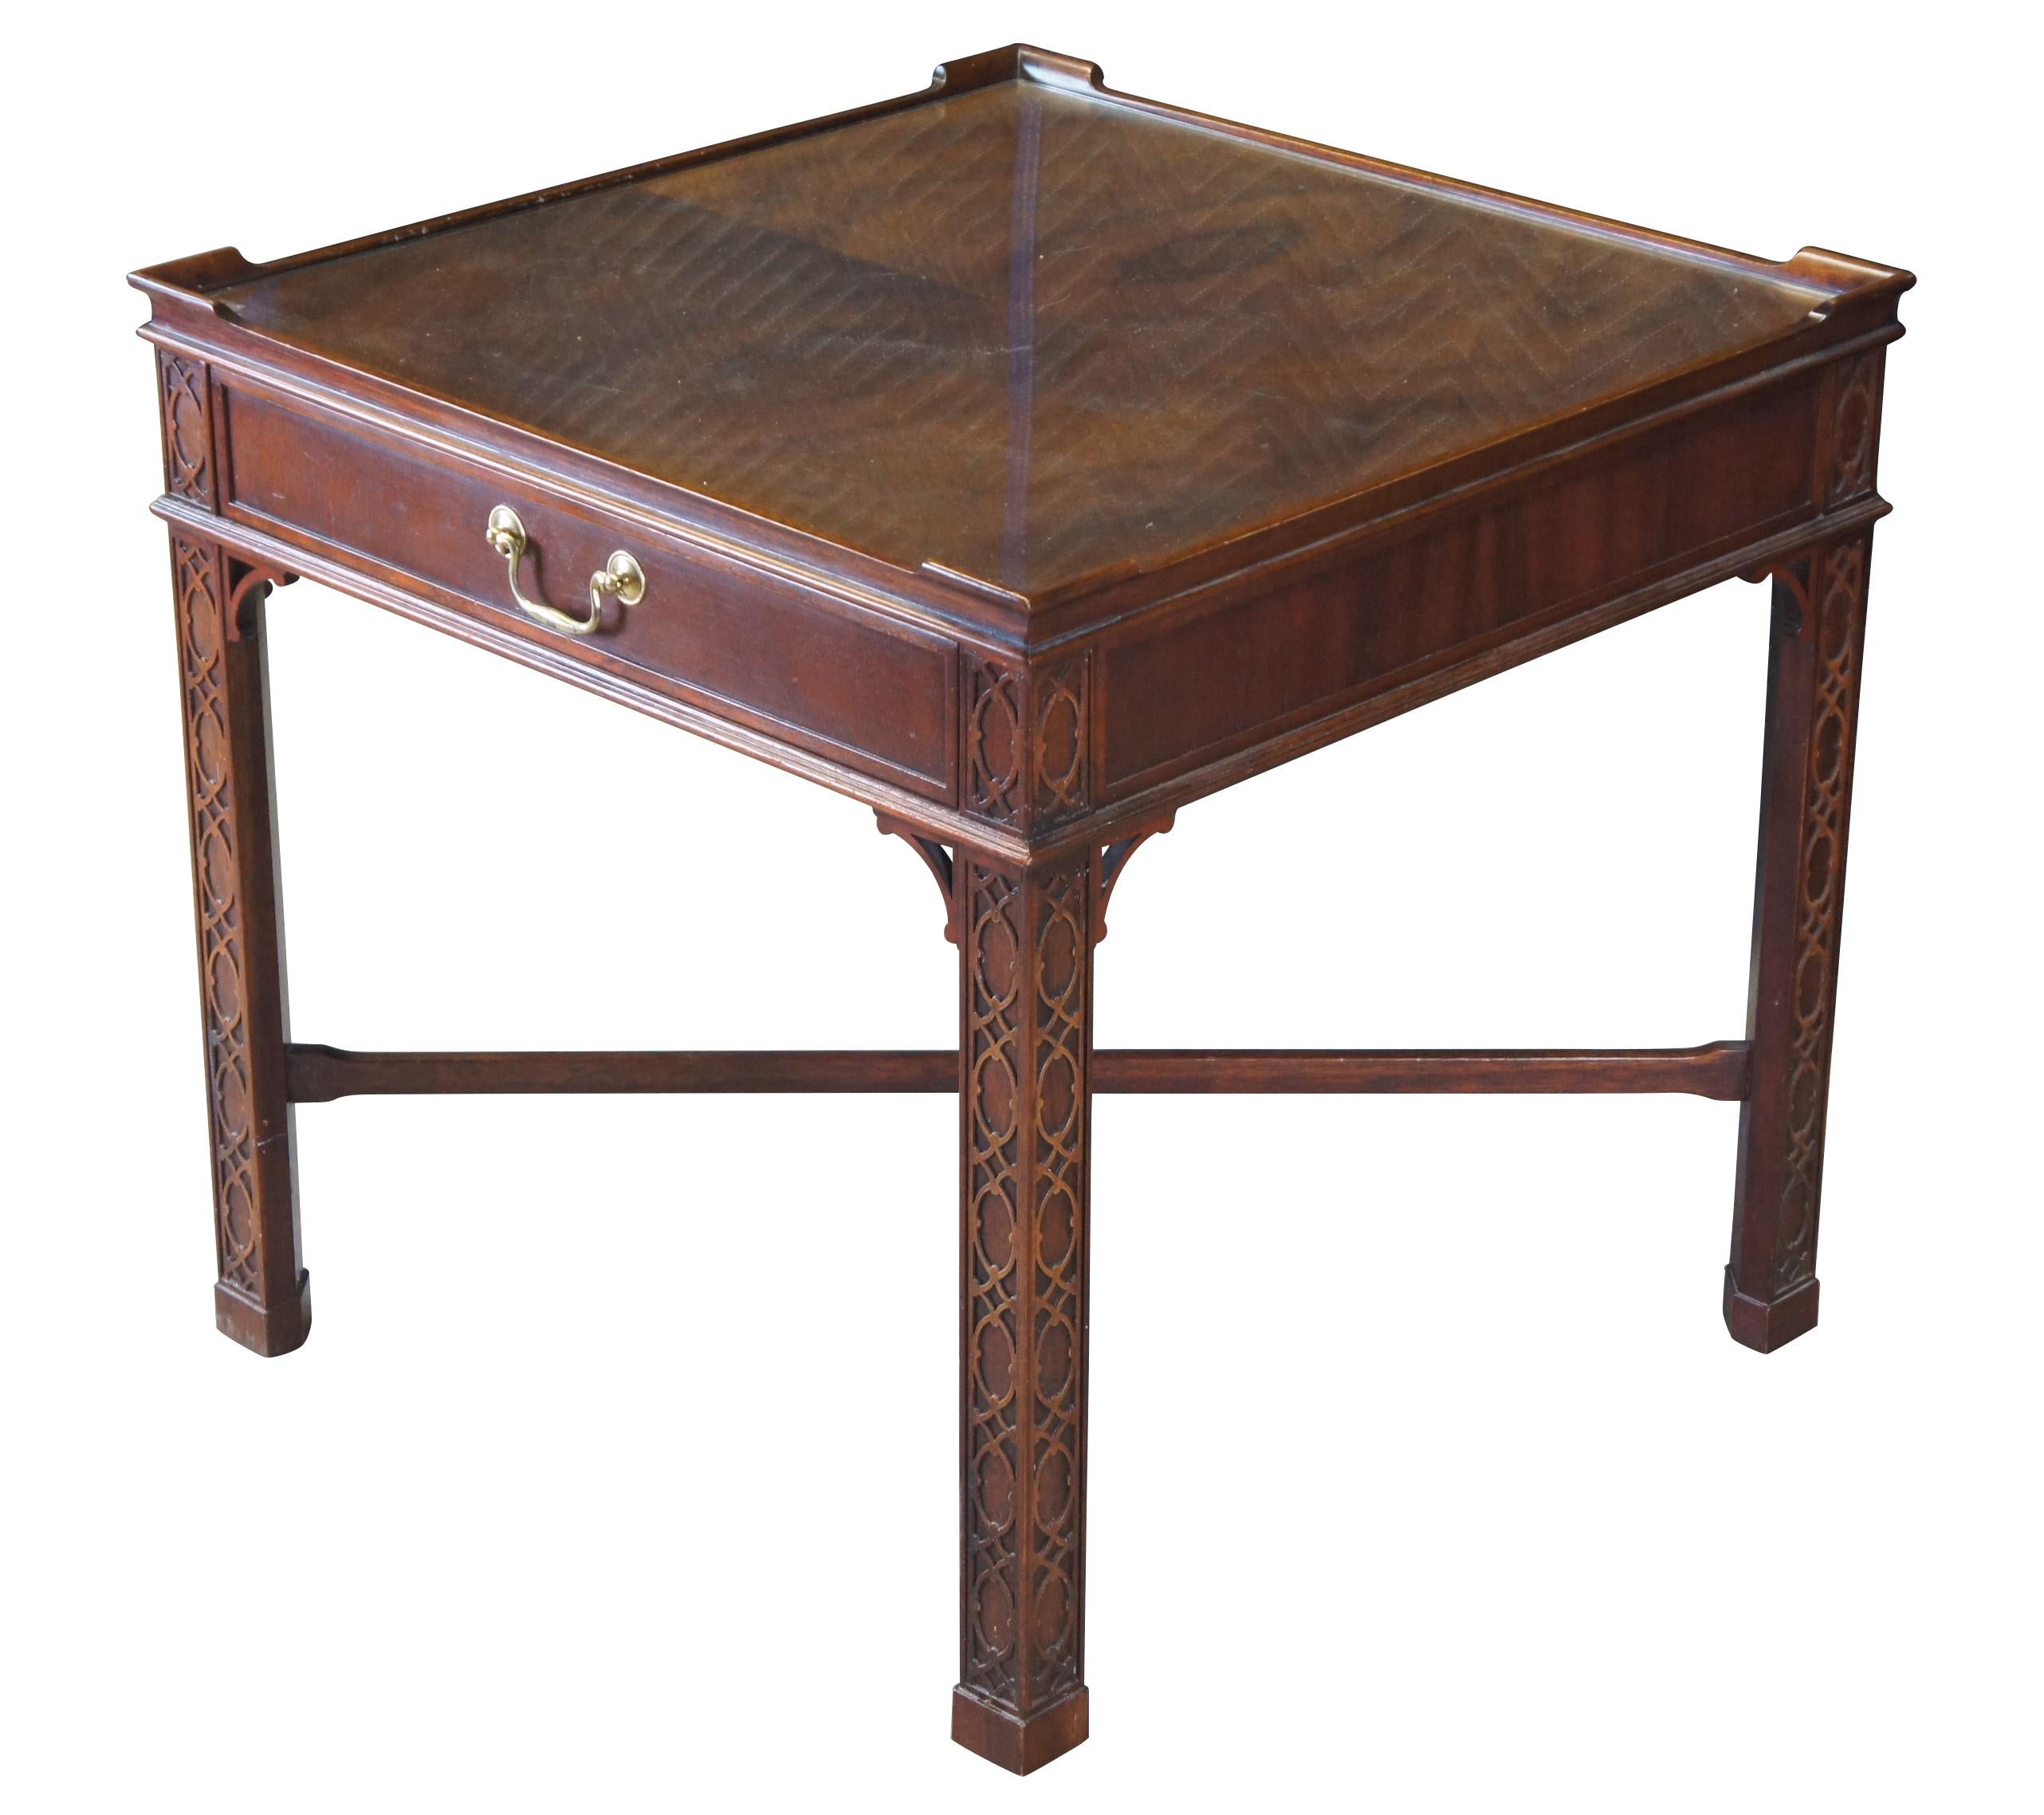 A regal occasional table by Baker Furniture, Circa last quarter 20th century.  Inspired by English Georgian & Chinese Chippendale styling.  Features a mahogany frame with inset matchbook veneered top and protective glass covering.  The table is